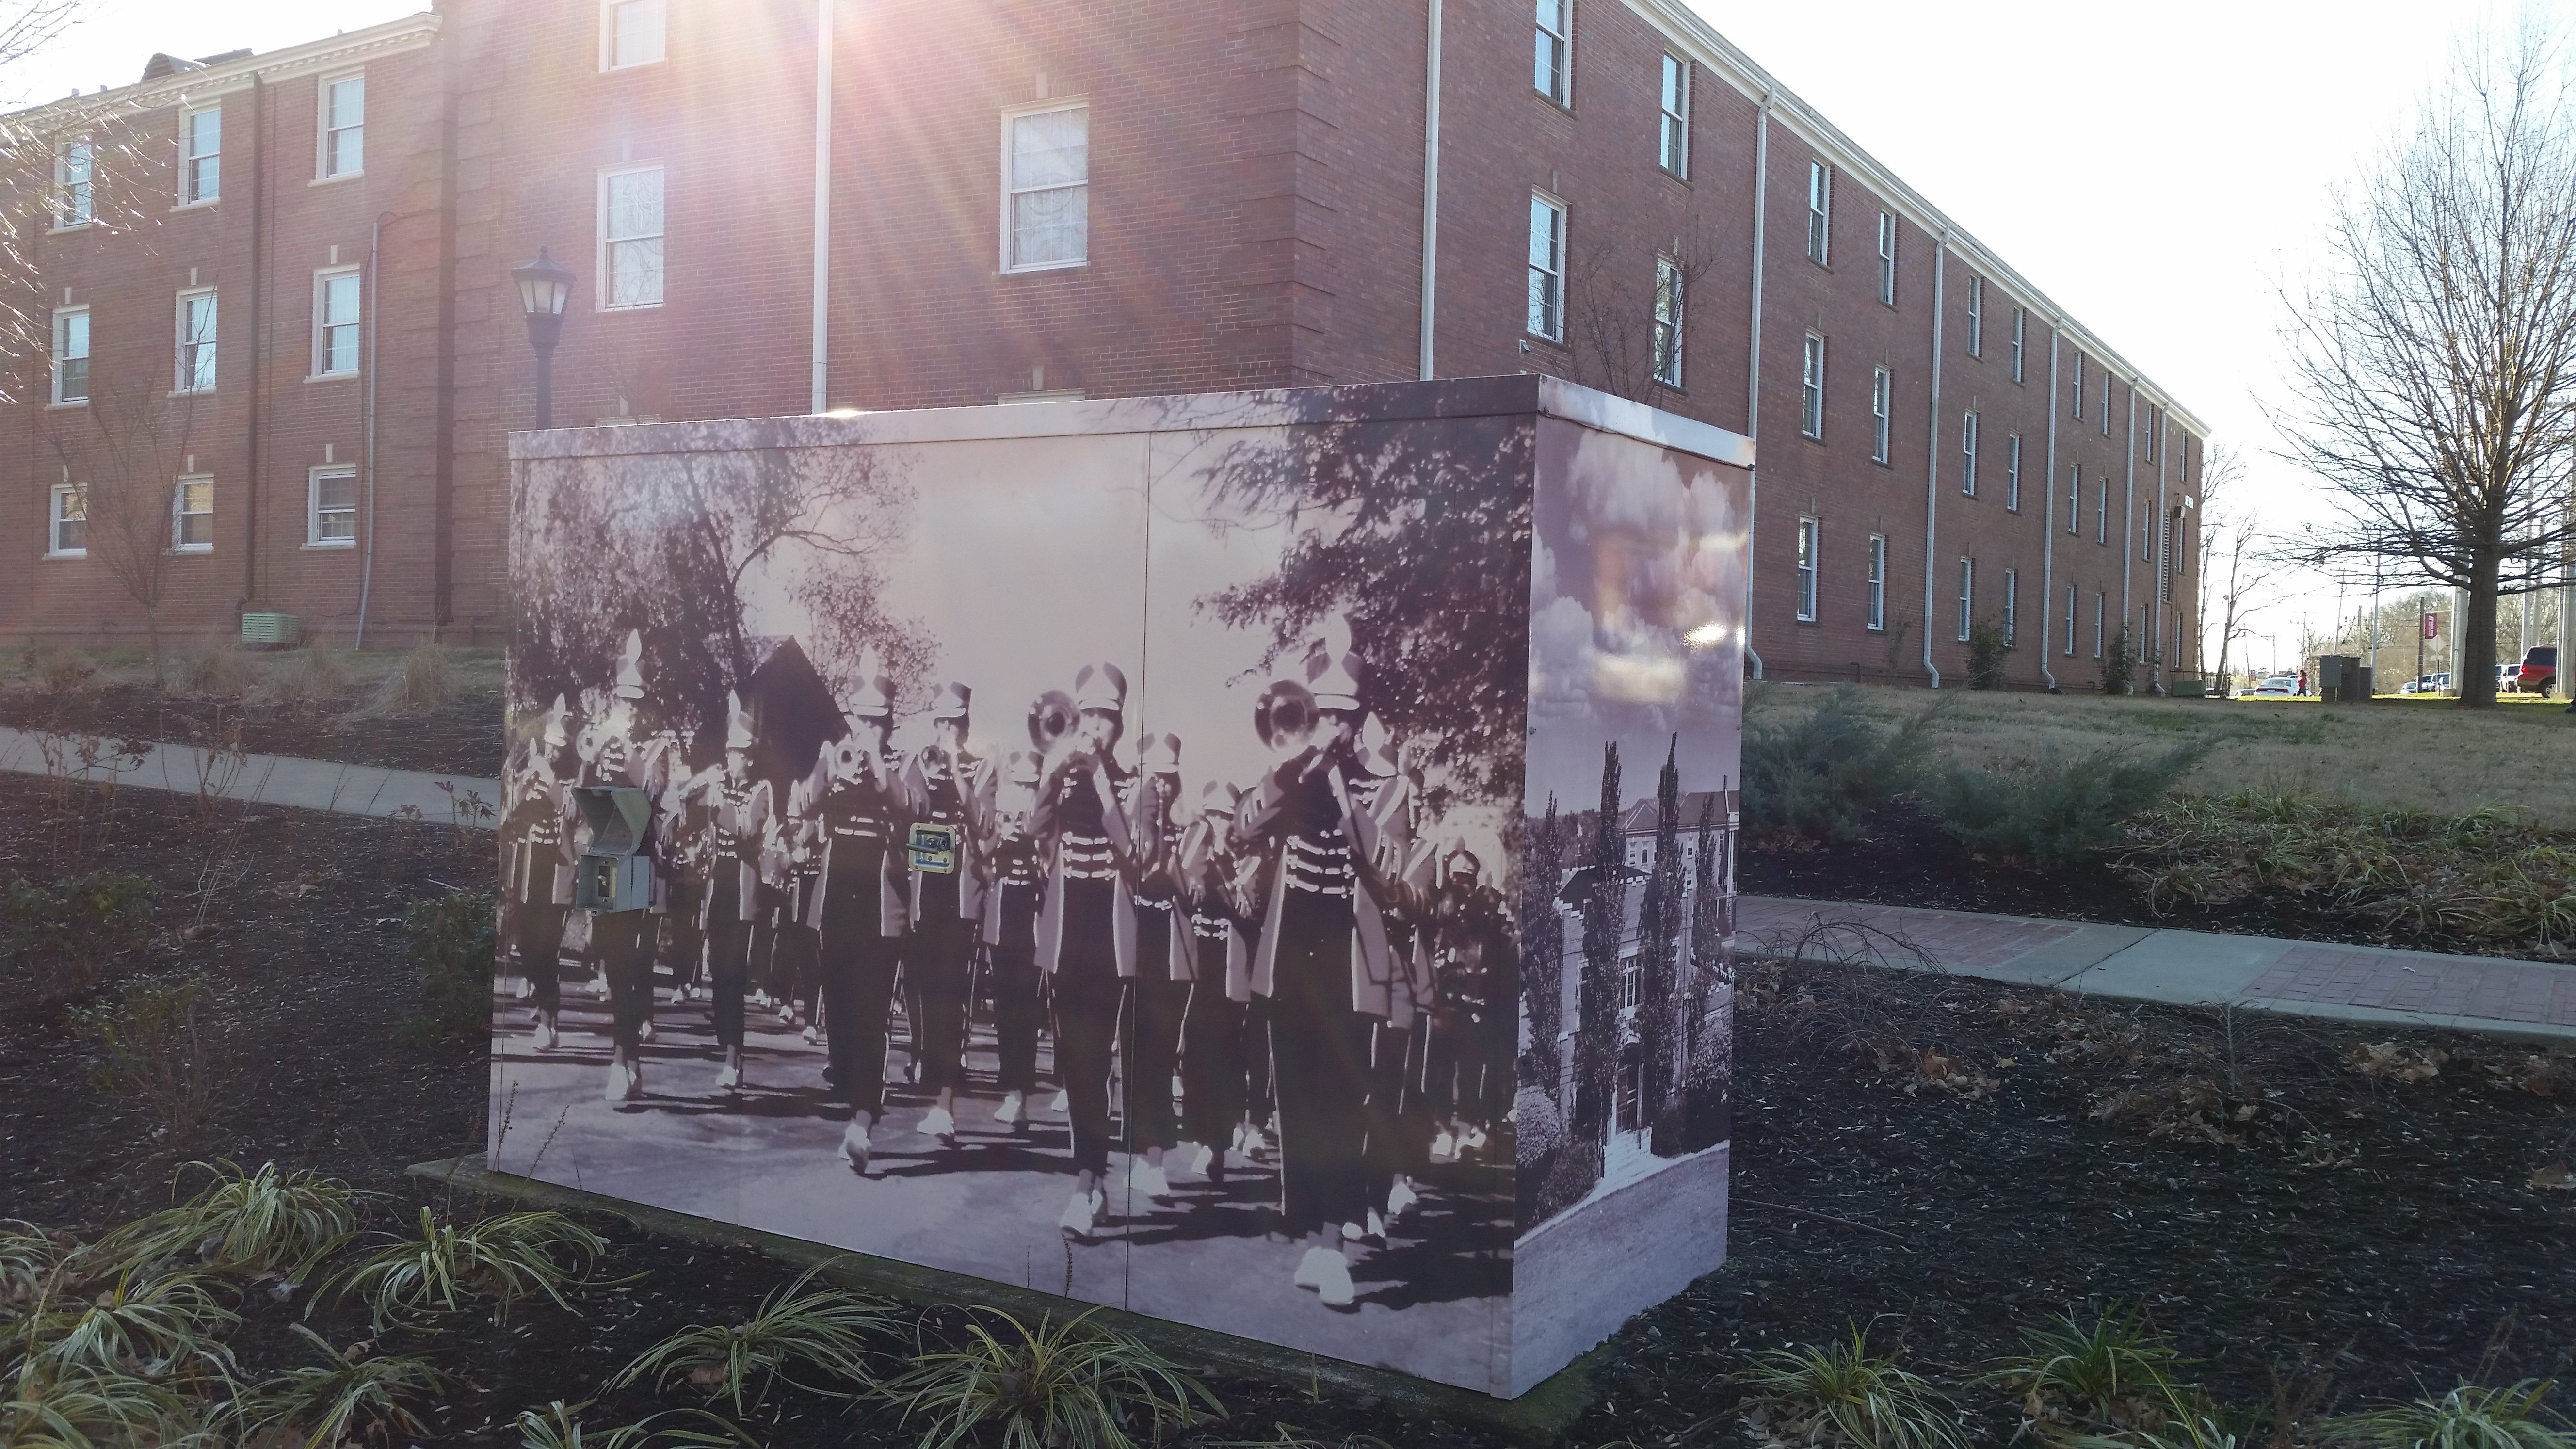 An enclosure in front of a brick building with an image of a marching band vinyl wrap.